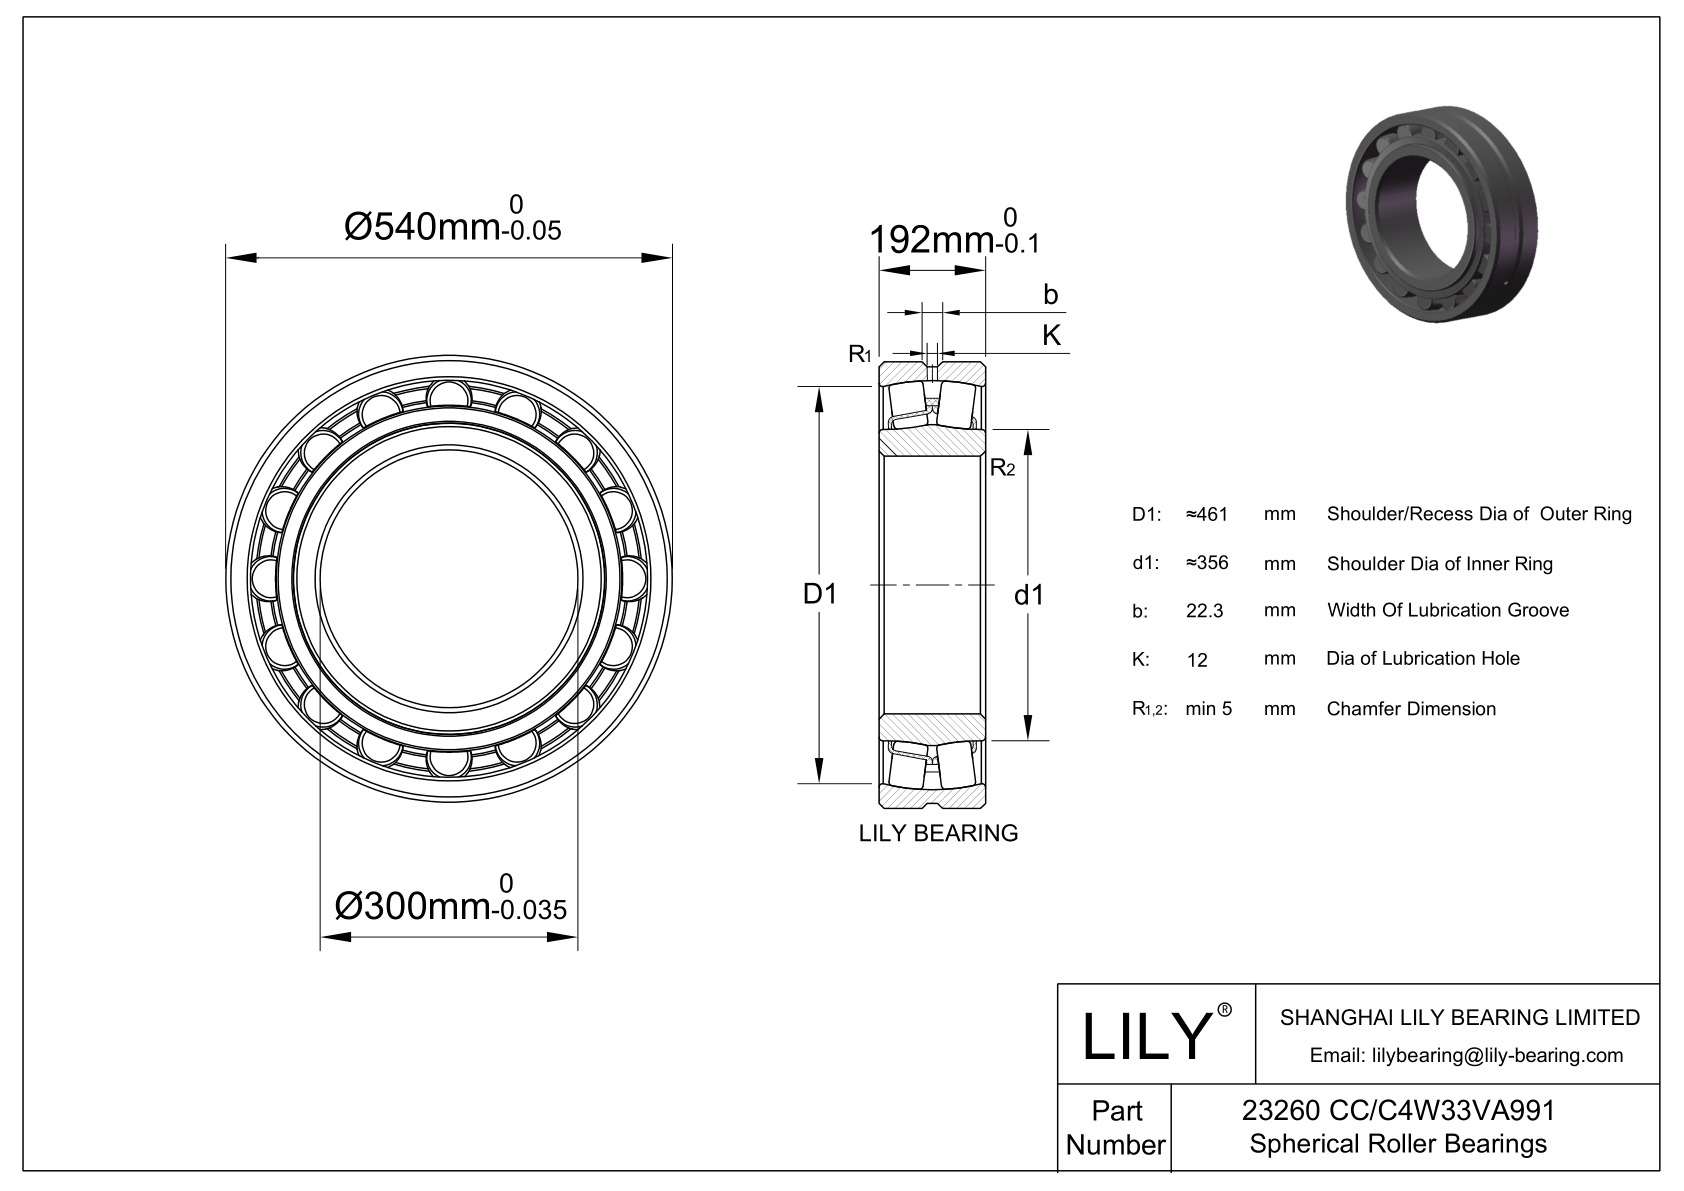 23260 CC/C4W33VA991 Double Row Spherical Roller Bearing cad drawing